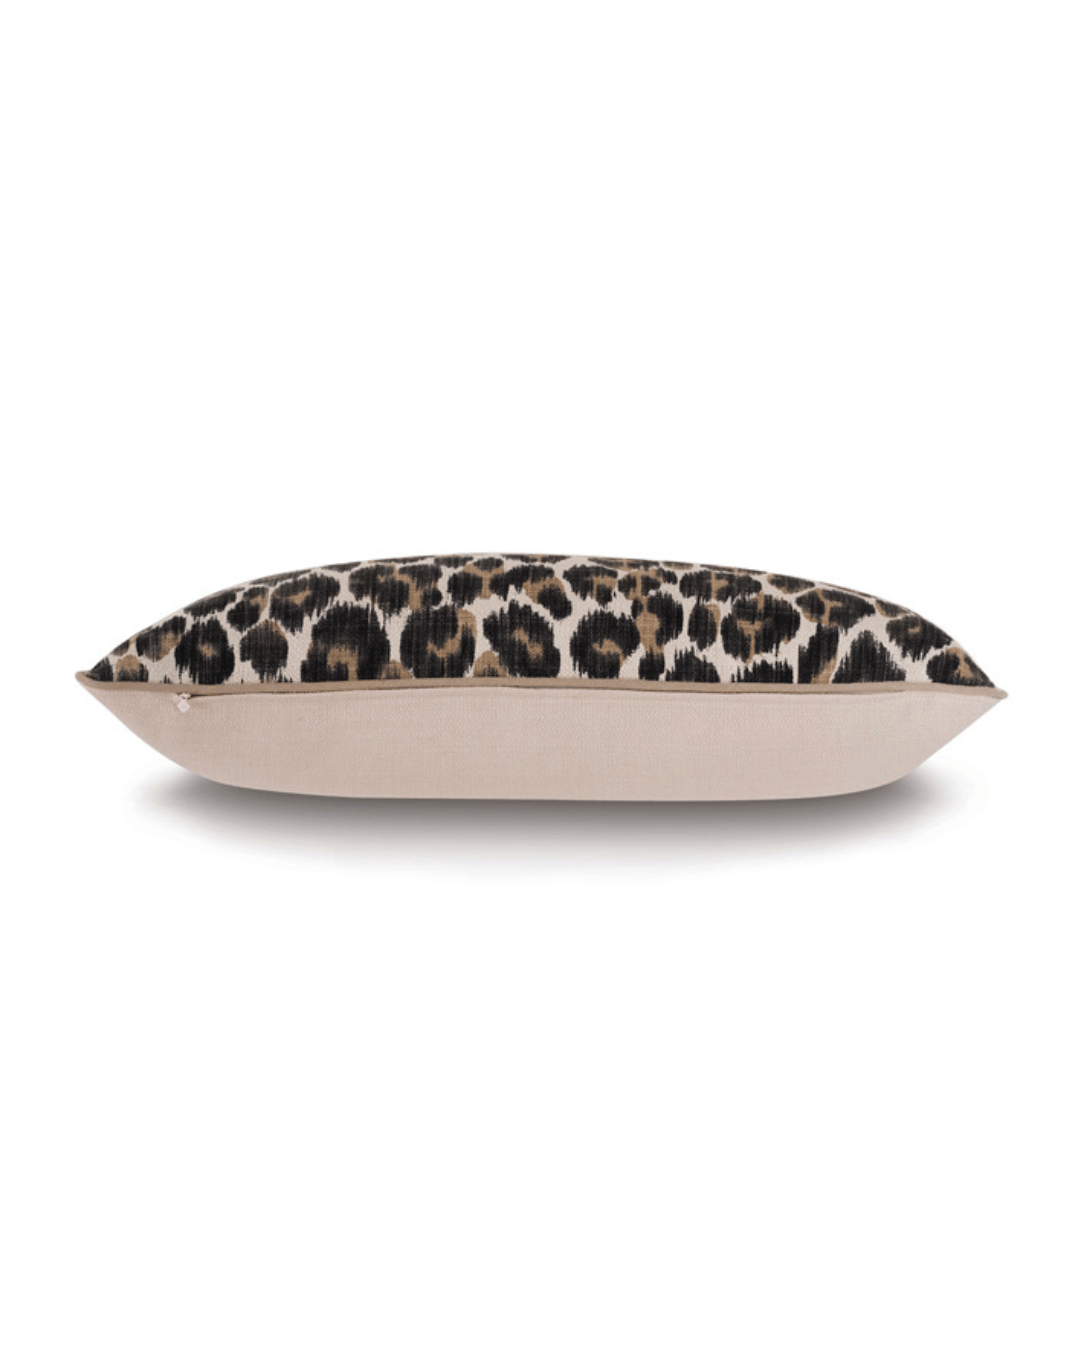 Gira Spot Pillow with a leopard print on one side and a plain beige fabric on the other, displayed against a bungalow-inspired backdrop in Scottsdale, Arizona by Eastern Accents.